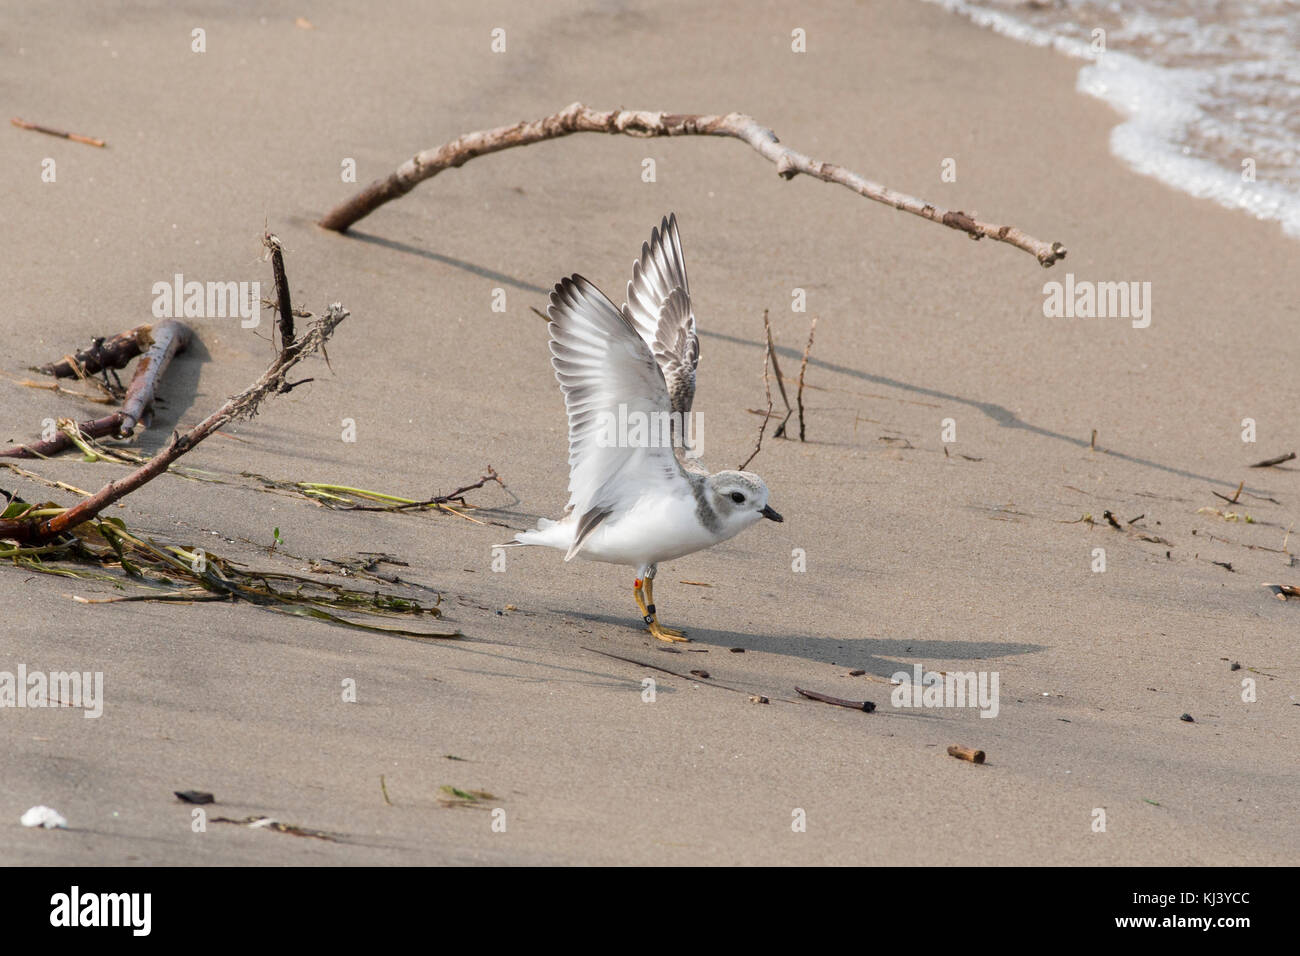 Piping plover (Charadrius melodus) with leg bands at Wasage Beach, Ontario. Stock Photo